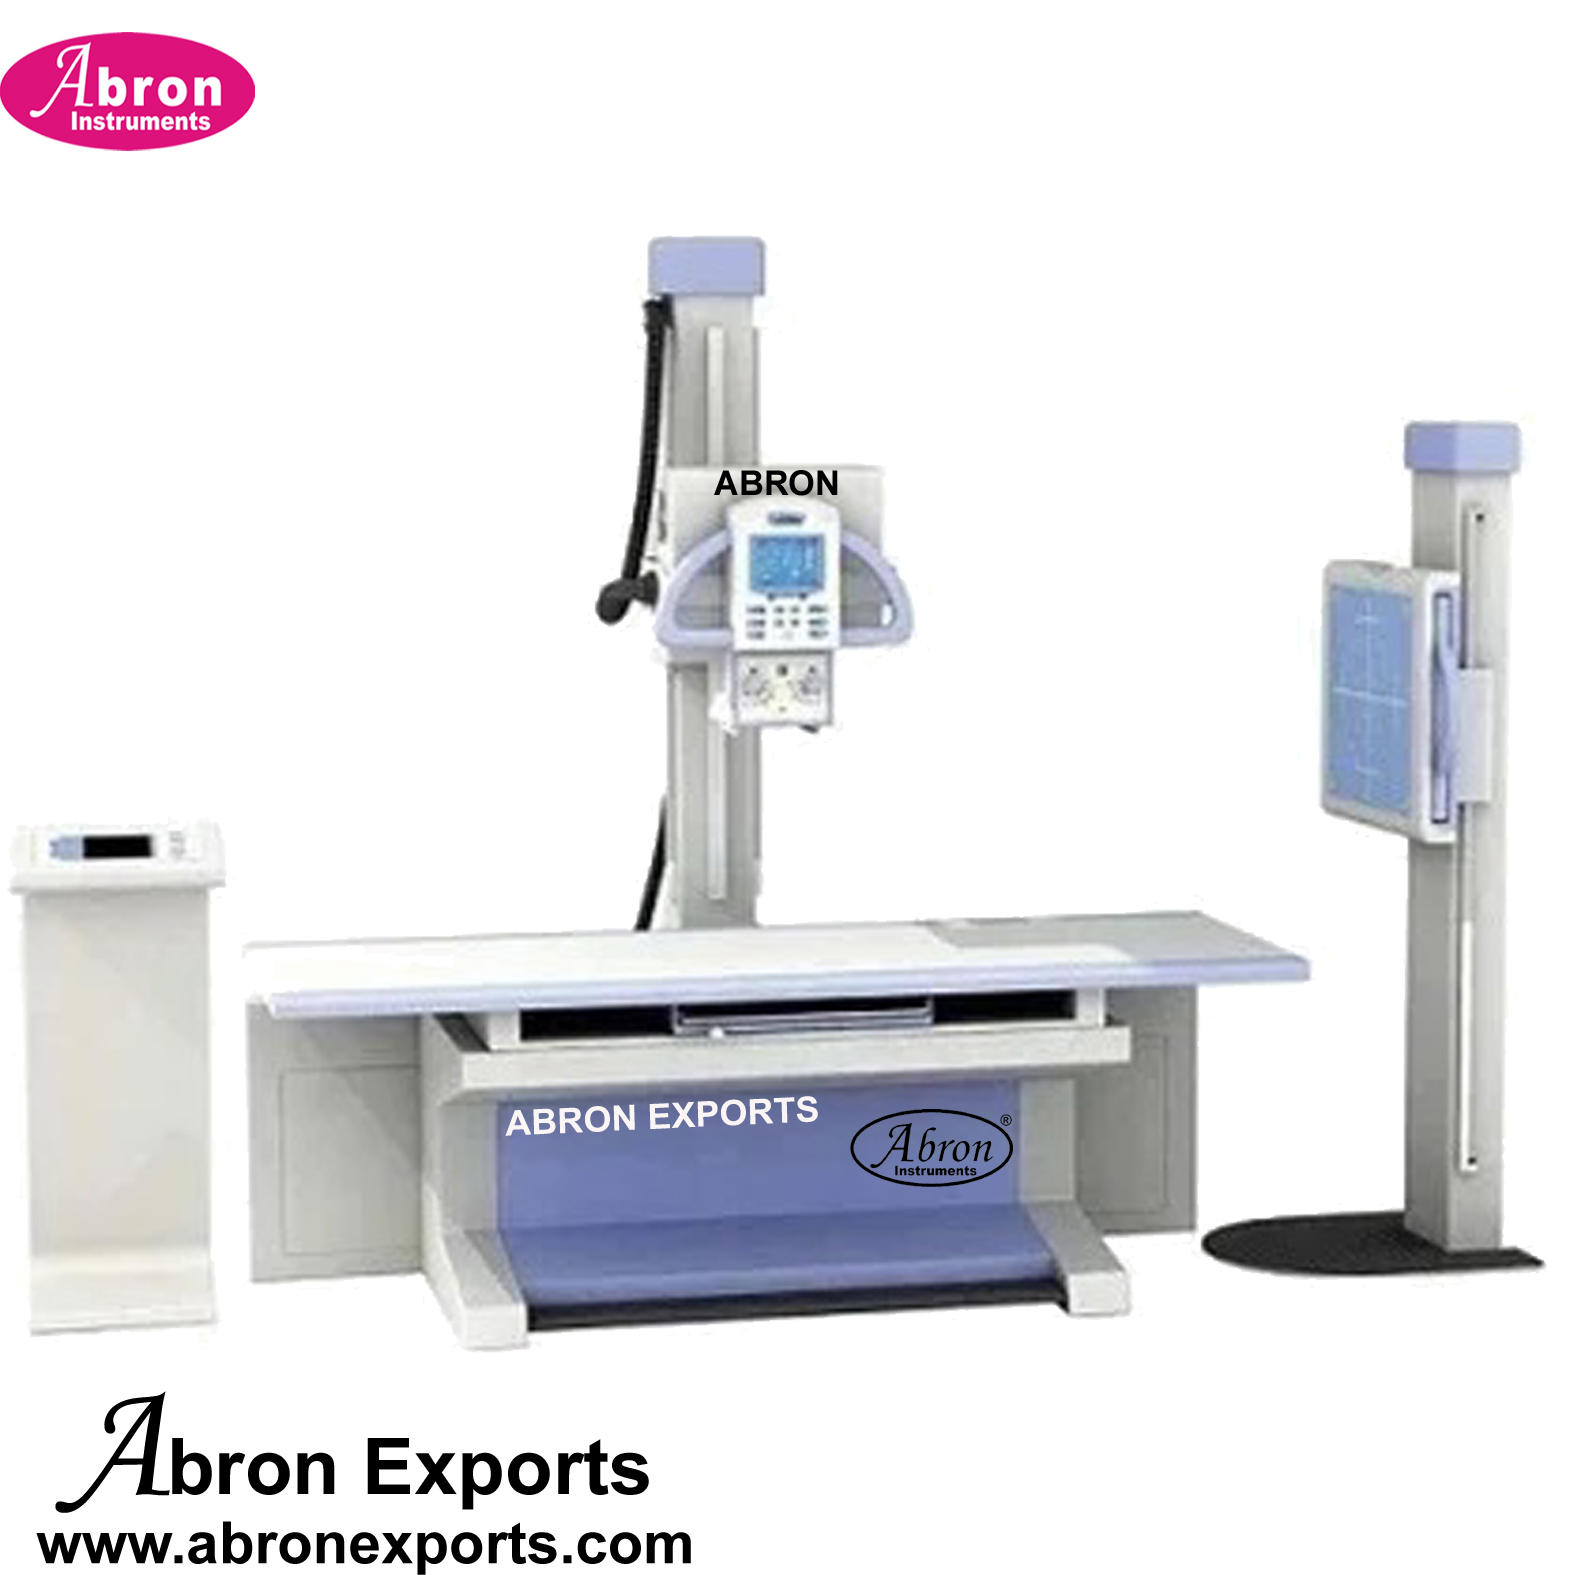 Ortho x-ray machine 300mA fixed with controller and stand platform setup Nursing Home Hospital Abron ABM-2782F3H 